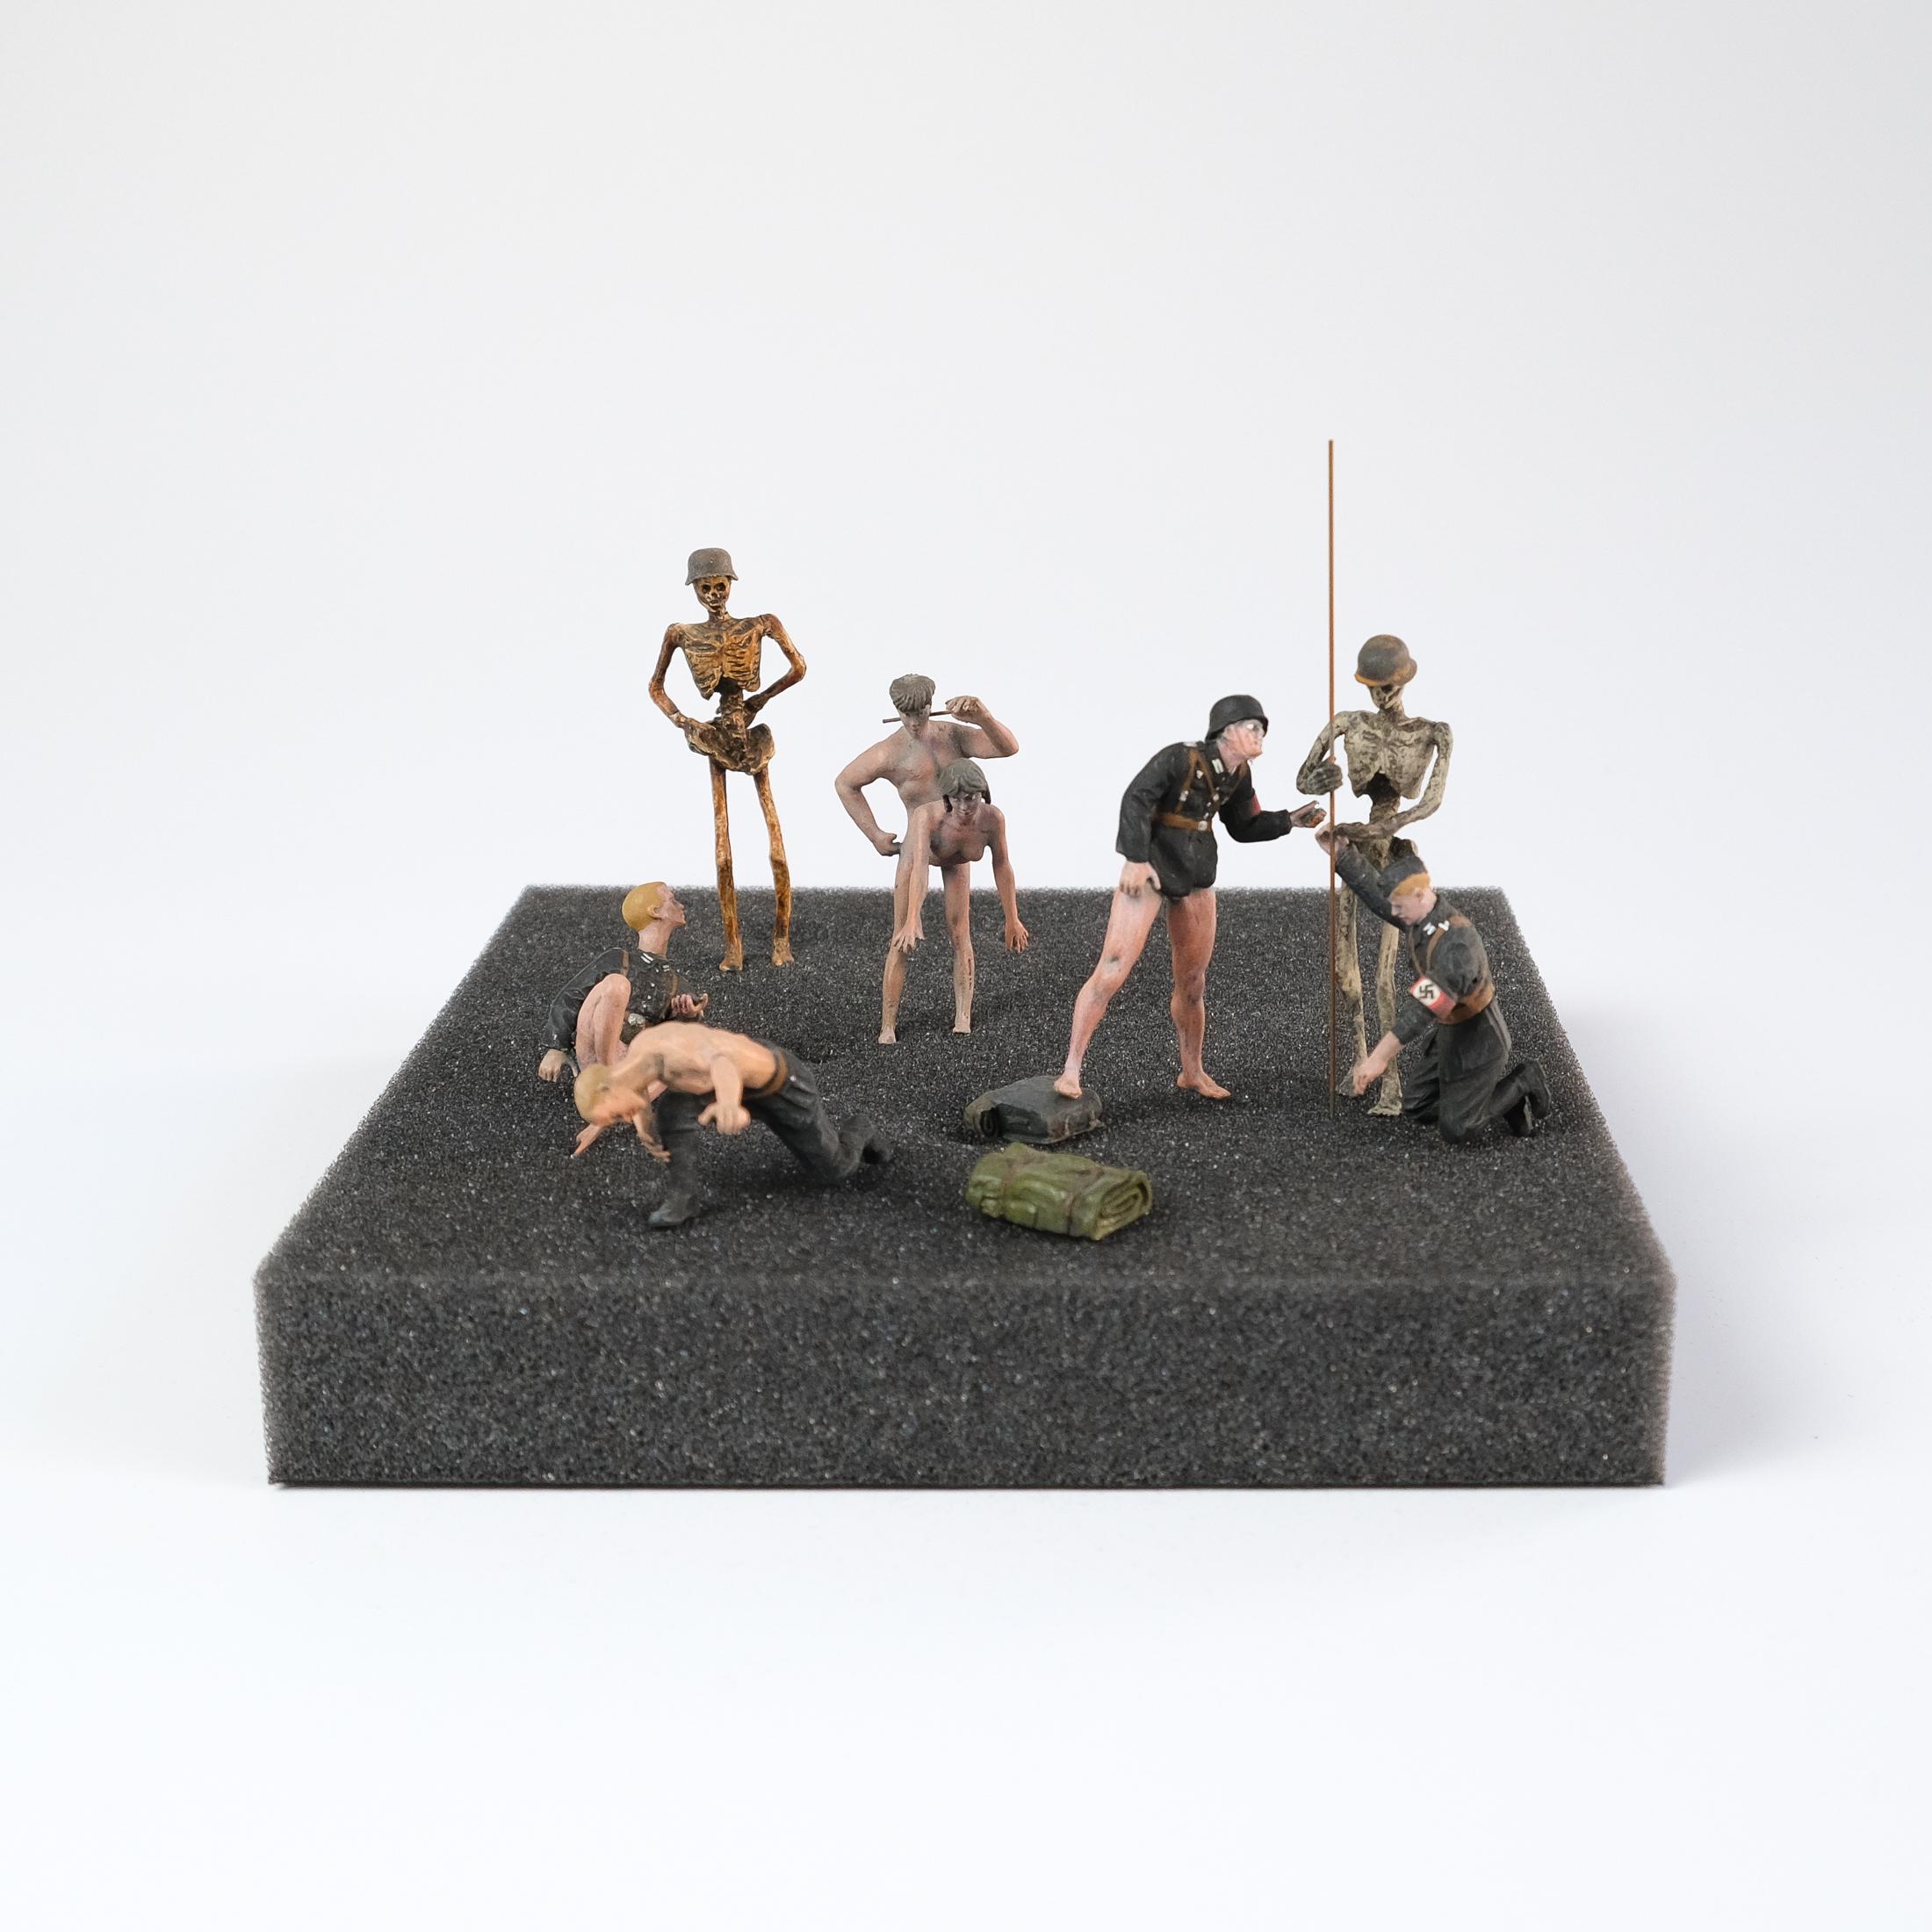 British 'Hell Souvenir' figures By Jake and Dinos Chapman, 2022 For Sale